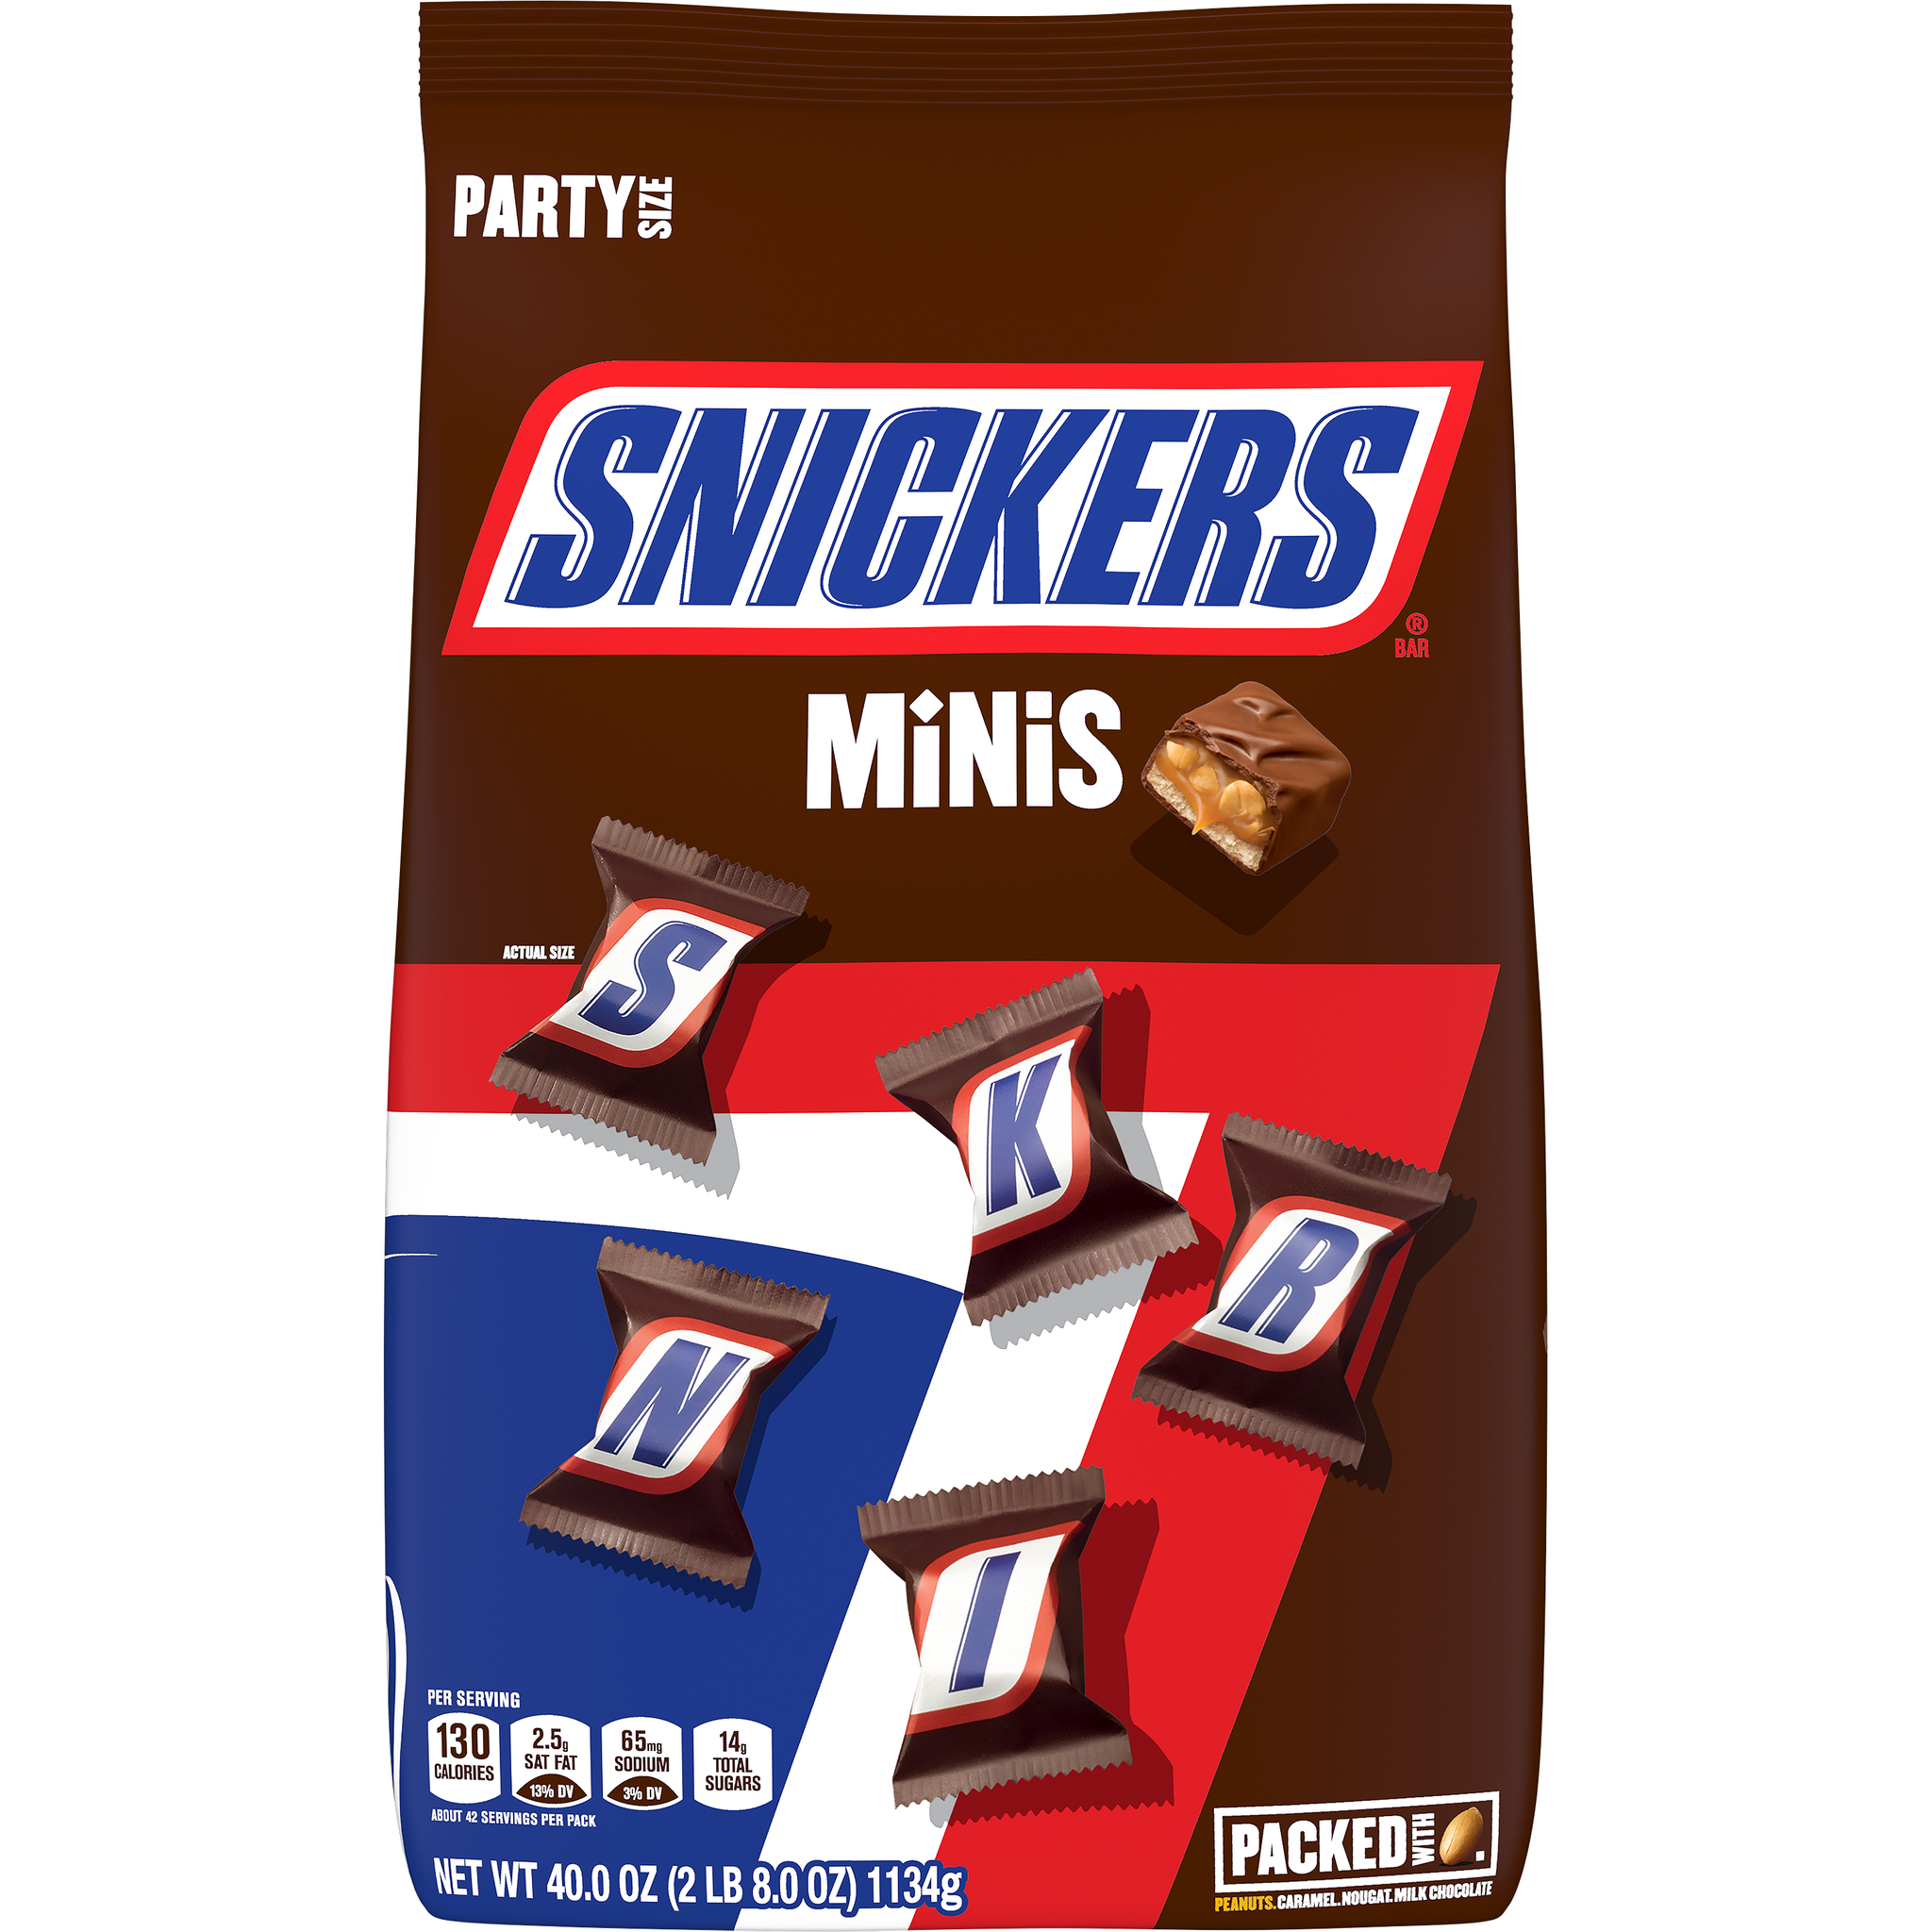 Snickers Fun Size Candy Bars - 10.59-oz. Bag - All City Candy